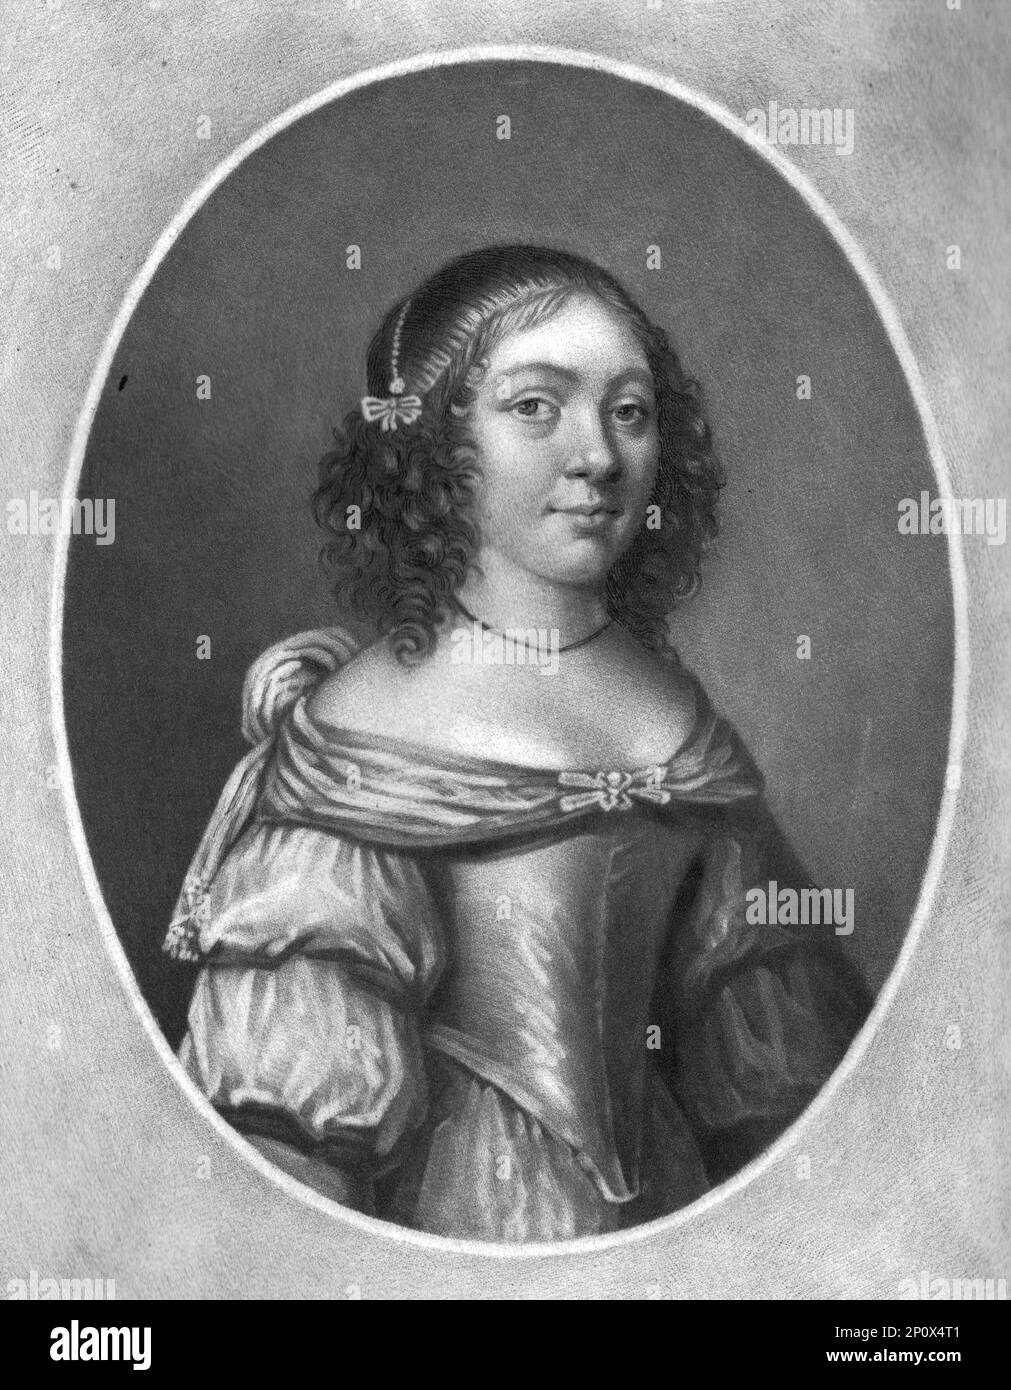 'Charlotte Stanley, Countess of Derby; Obit 1663, buried at Ormskirk', 1810. From From &quot;Portraits of characters illustrious in British History from the beginning of the reign of Henry the Eighth to the end of the reign of James the Second&quot; [Samuel Woodburn, London, 1815]. Stock Photo